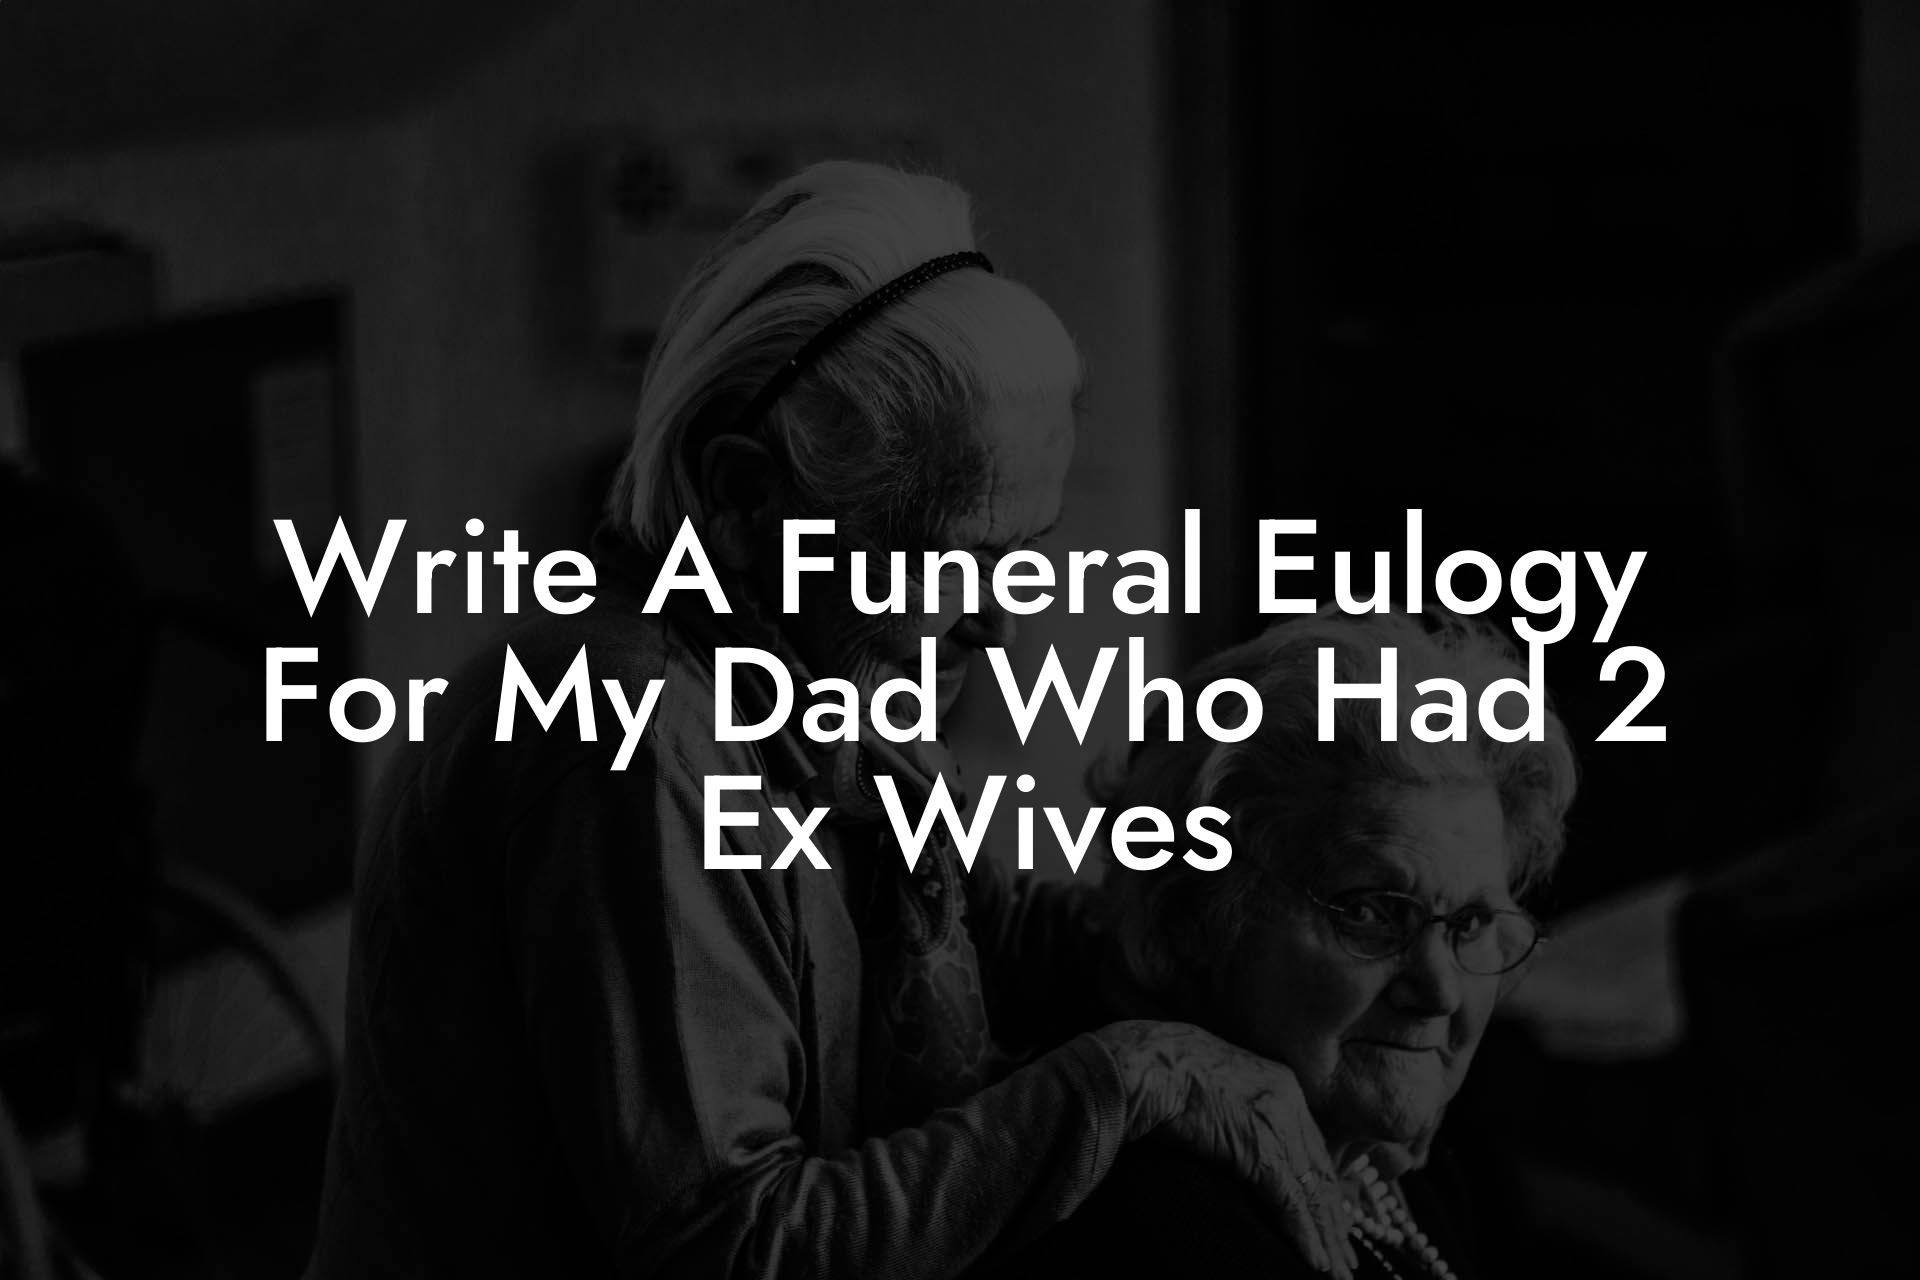 Write A Funeral Eulogy For My Dad Who Had 2 Ex Wives